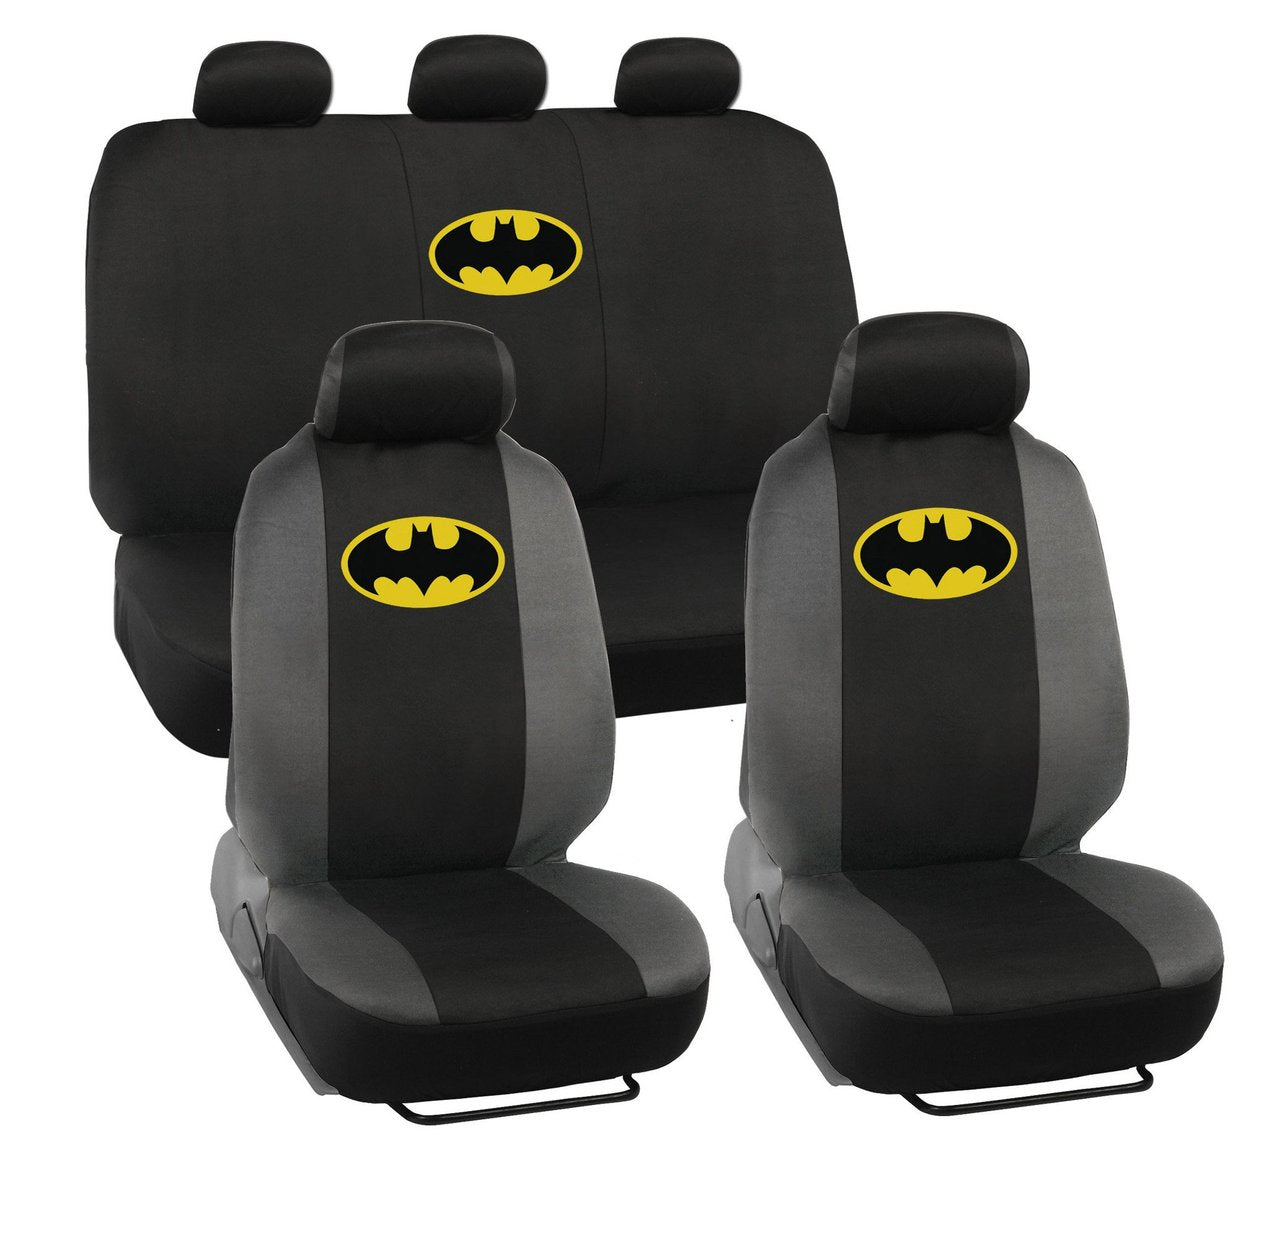 Classic Batman Seat Covers for Car - 9pc Universal Fit - Licensed Interior Accessories